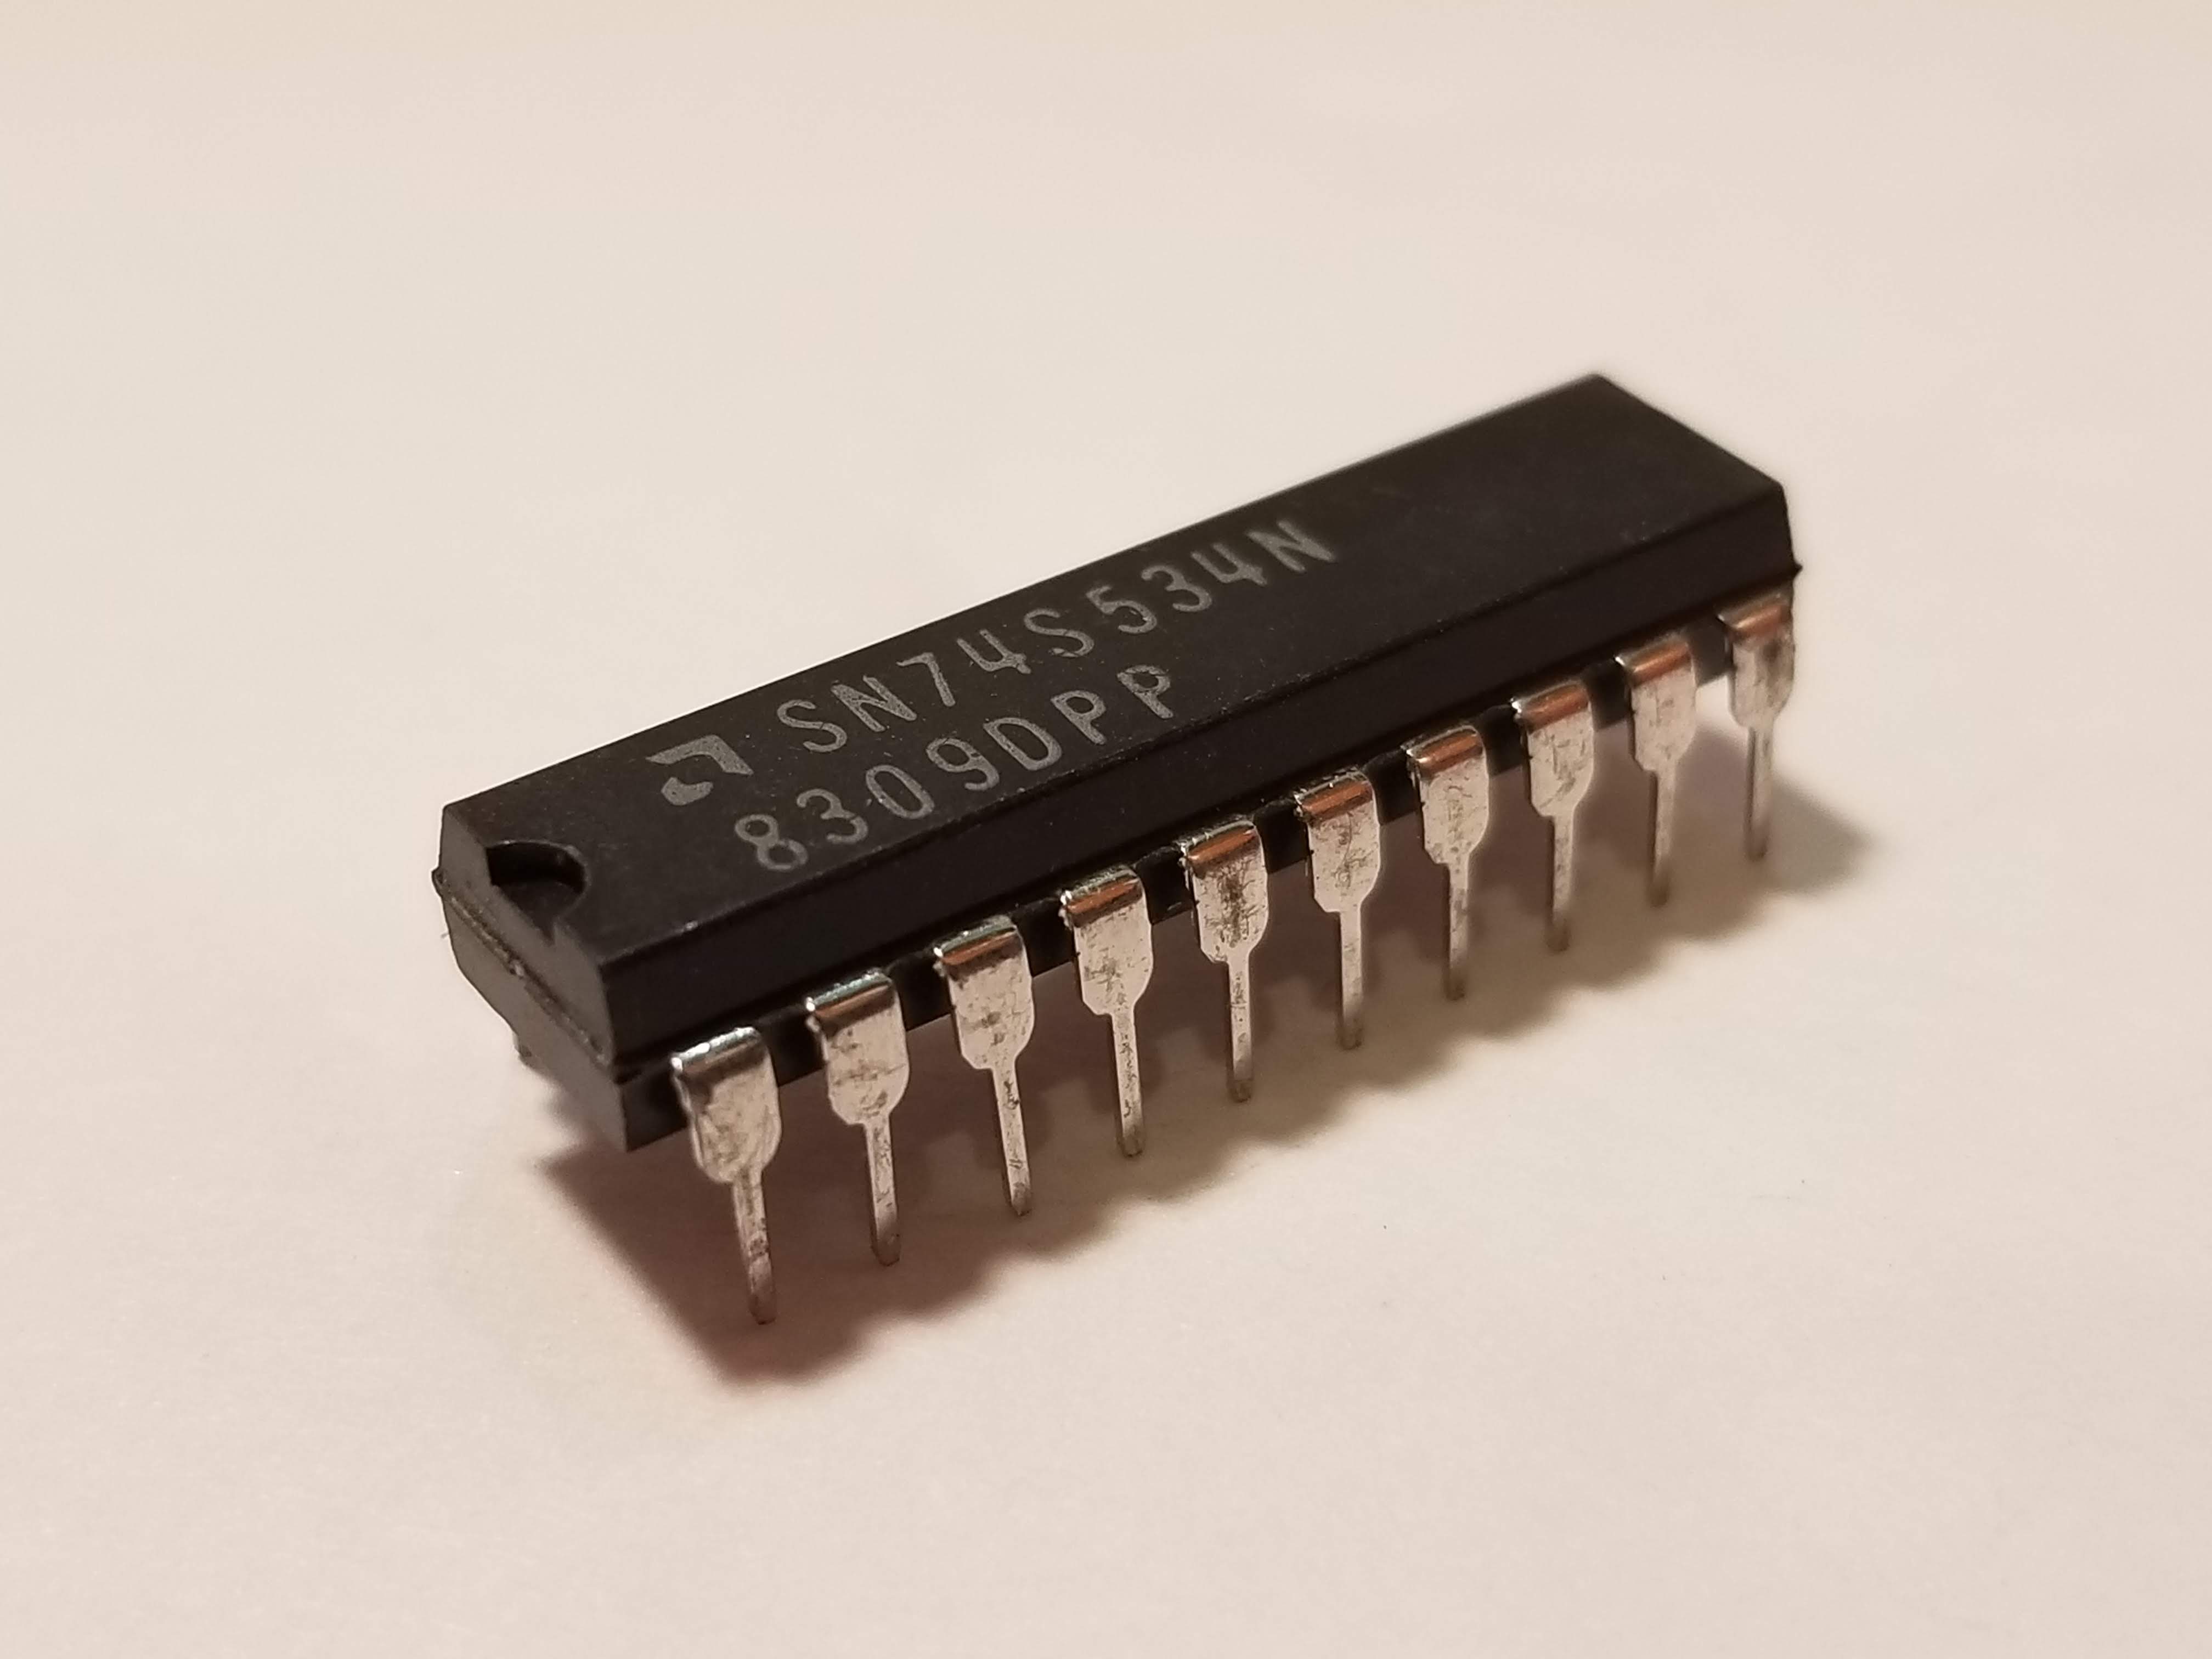 Picture of 74534 Octal D Flip-Flop with Tristate Outputs